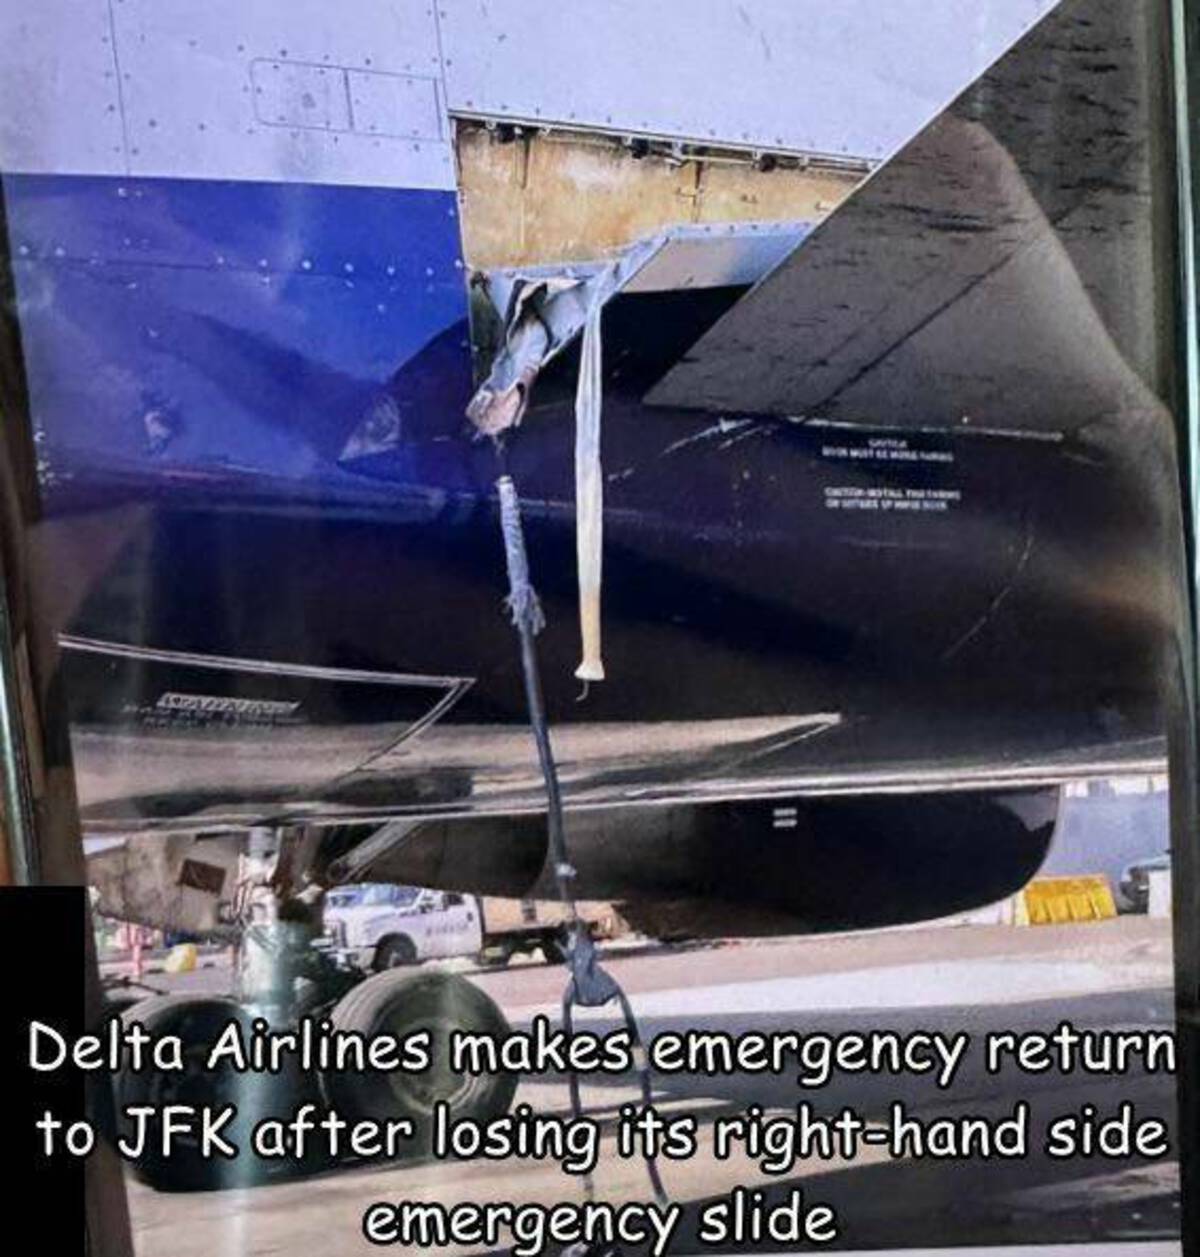 Boeing 767 - Delta Airlines makes emergency return to Jfk after losing its righthand side emergency slide